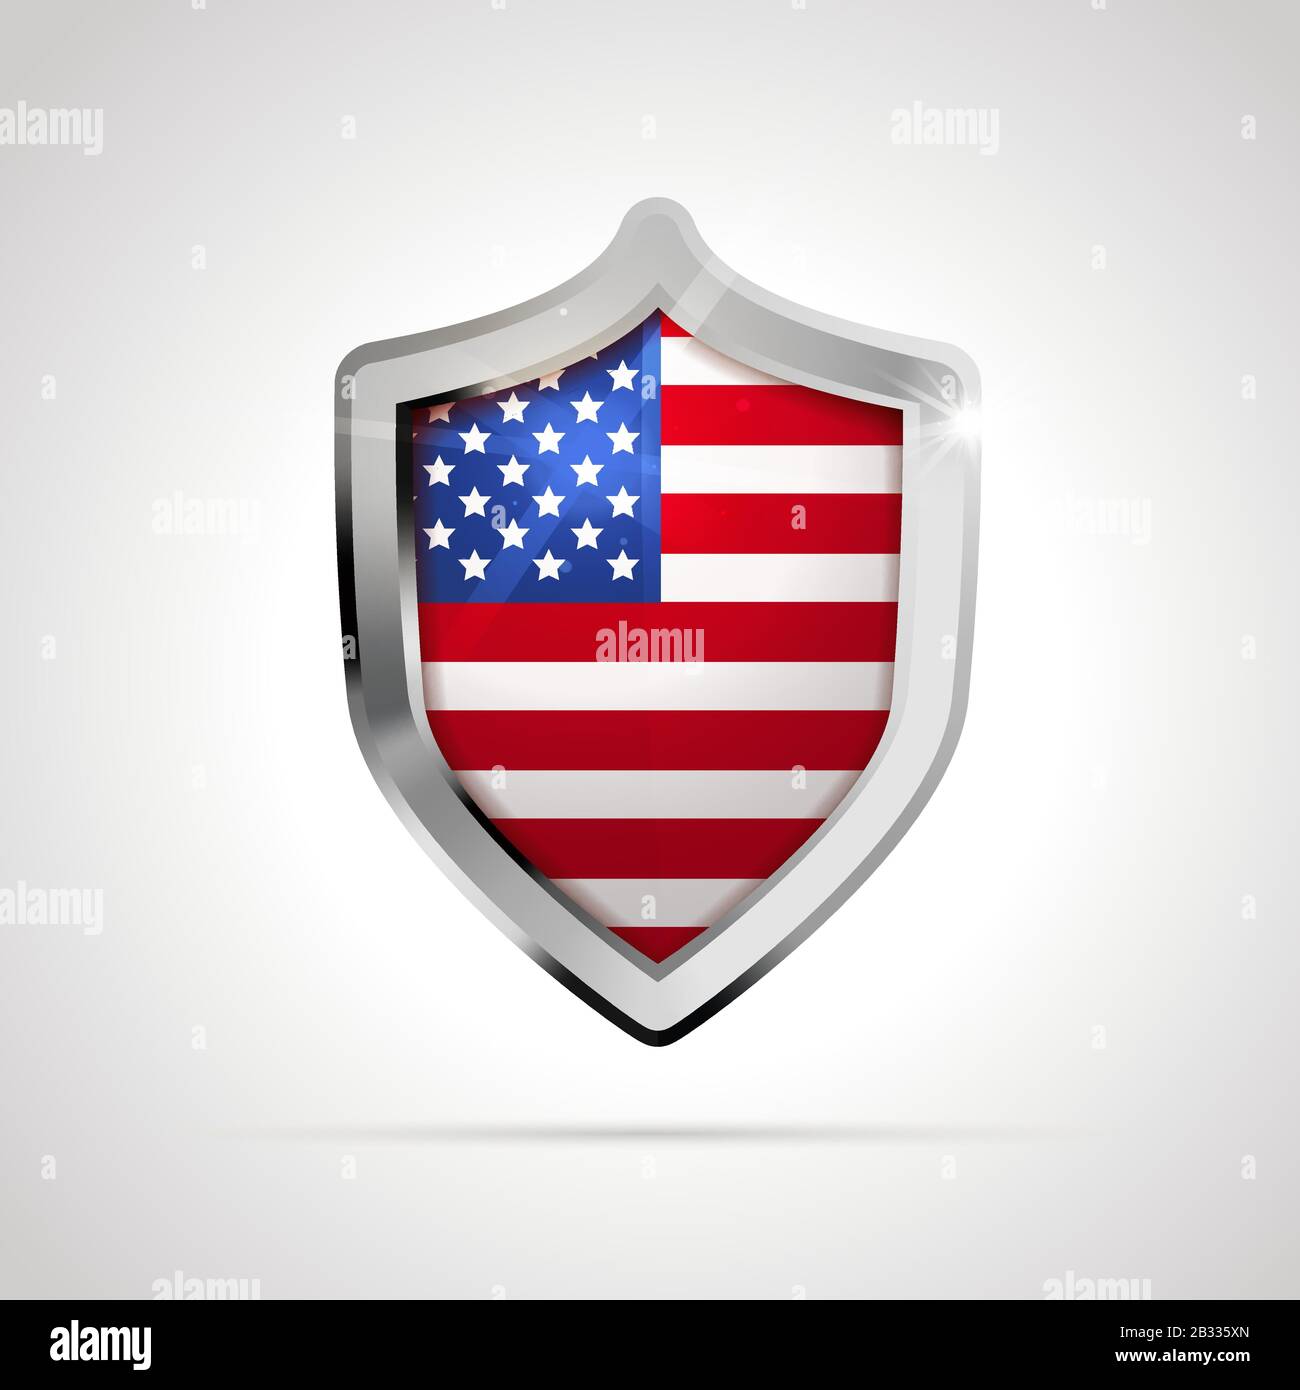 USA flag projected as a glossy shield on a white background Stock Vector